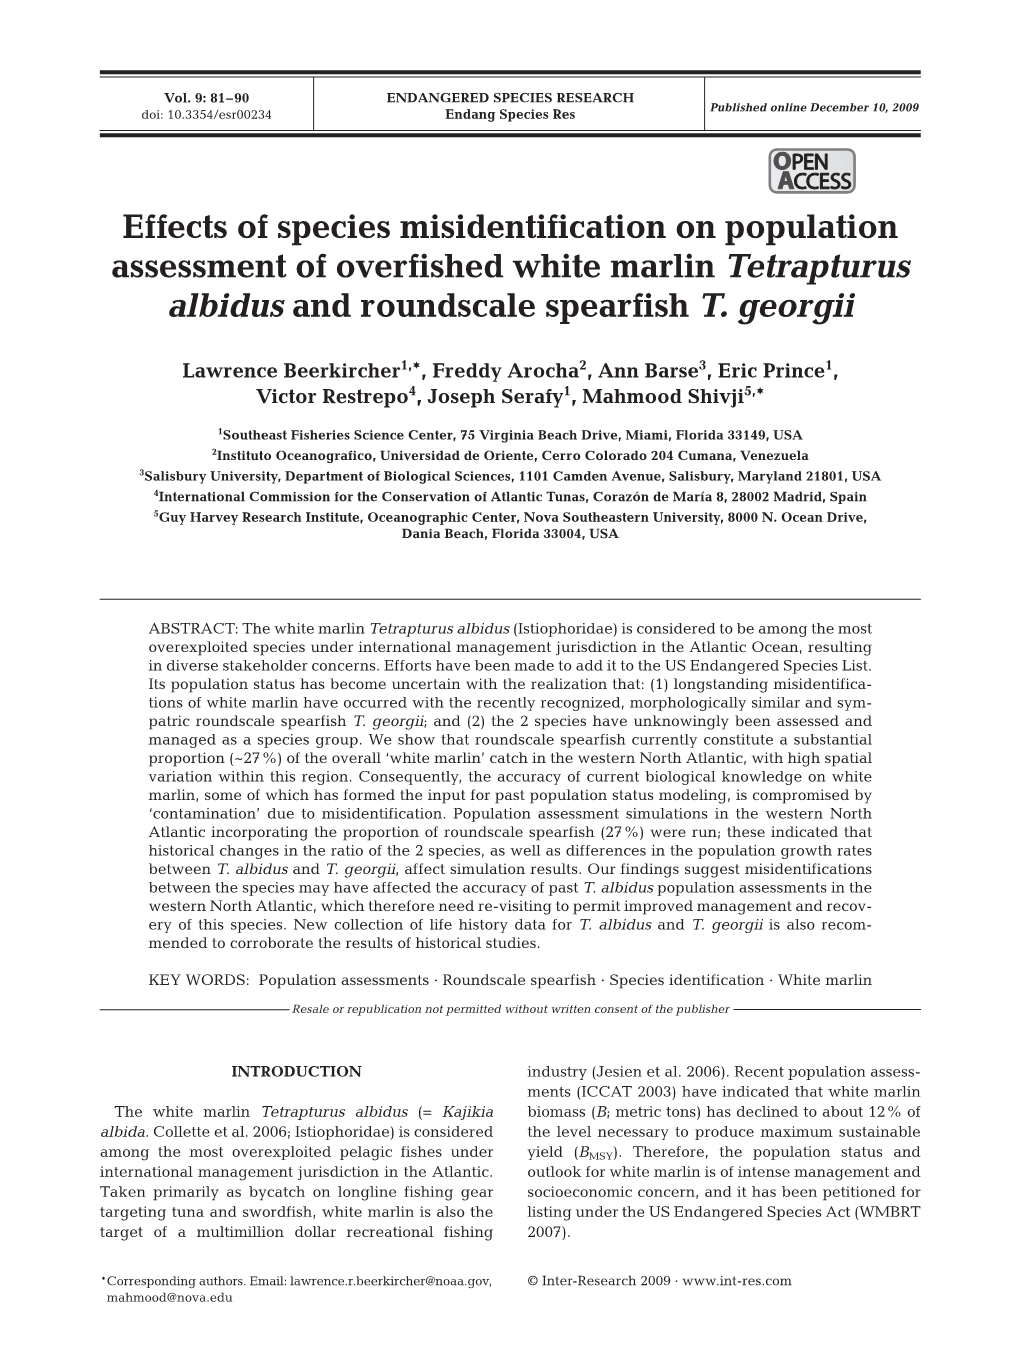 Effects of Species Misidentification on Population Assessment of Overfished White Marlin Tetrapturus Albidus and Roundscale Spearfish T